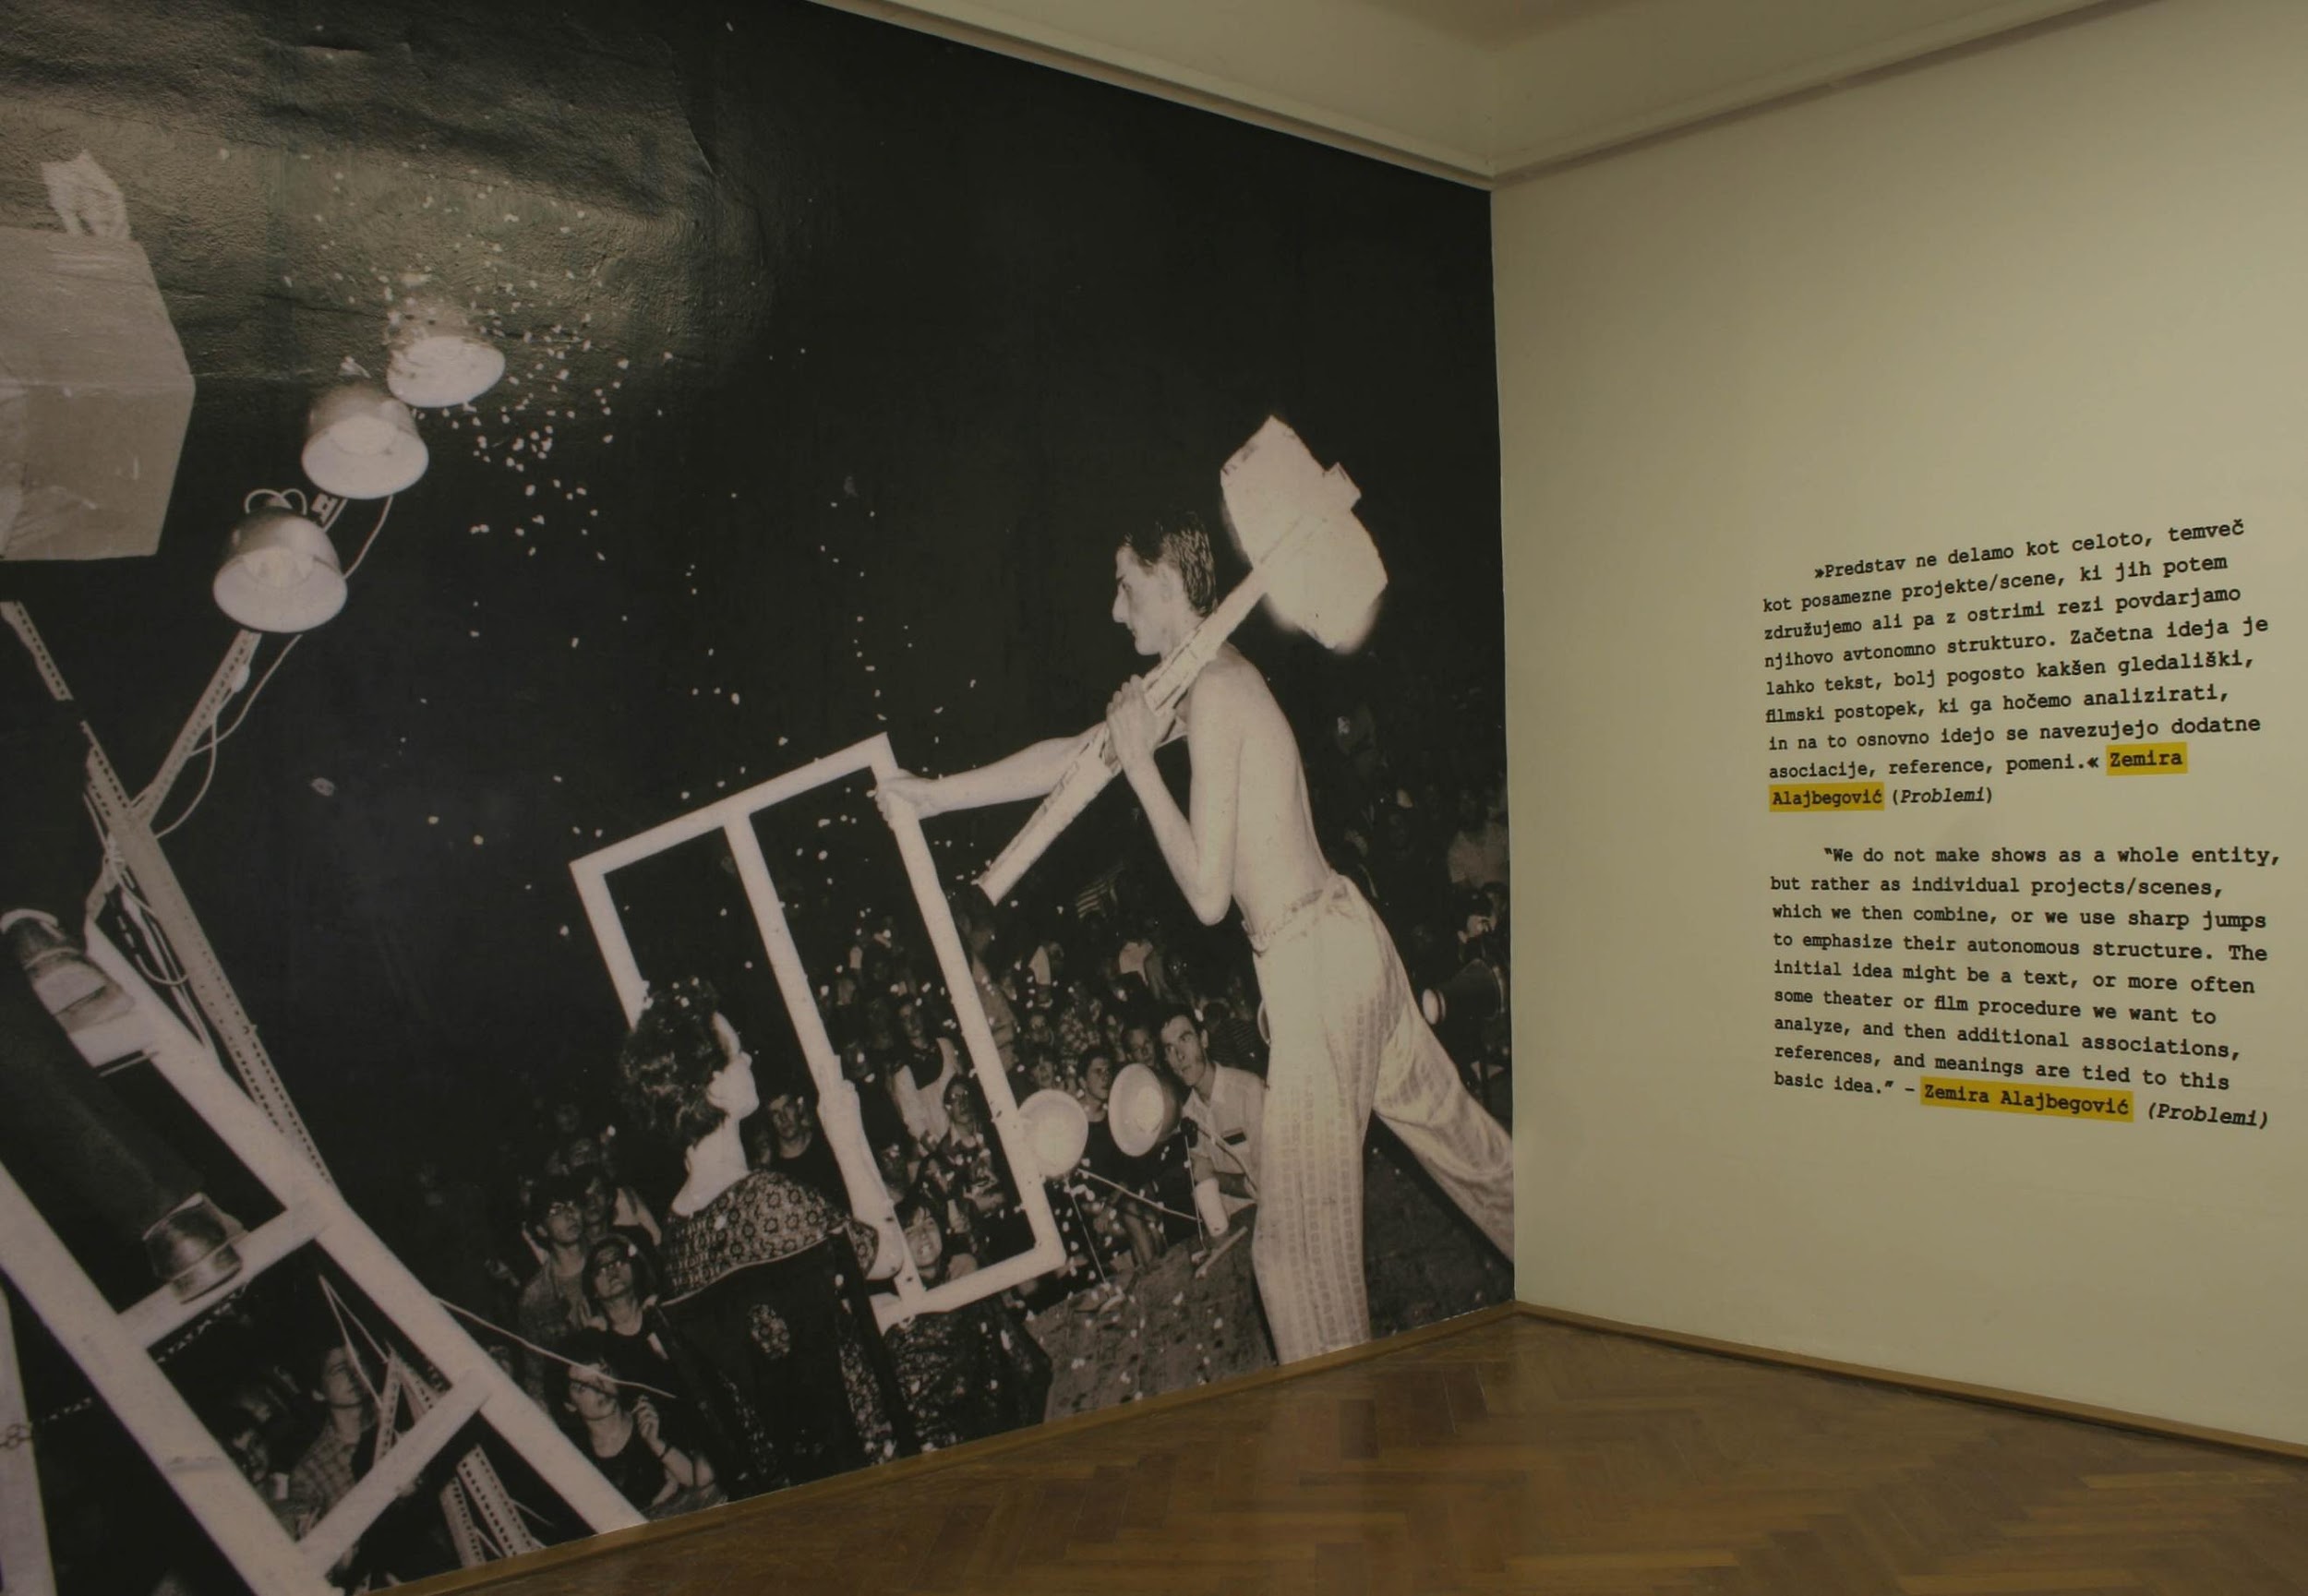 A photograph from the exhibition FV: Alternativa osemdesetih/The Alternative Scene in the Eighties held at the ICGA from 27 November 2008 to 18 January 2009.